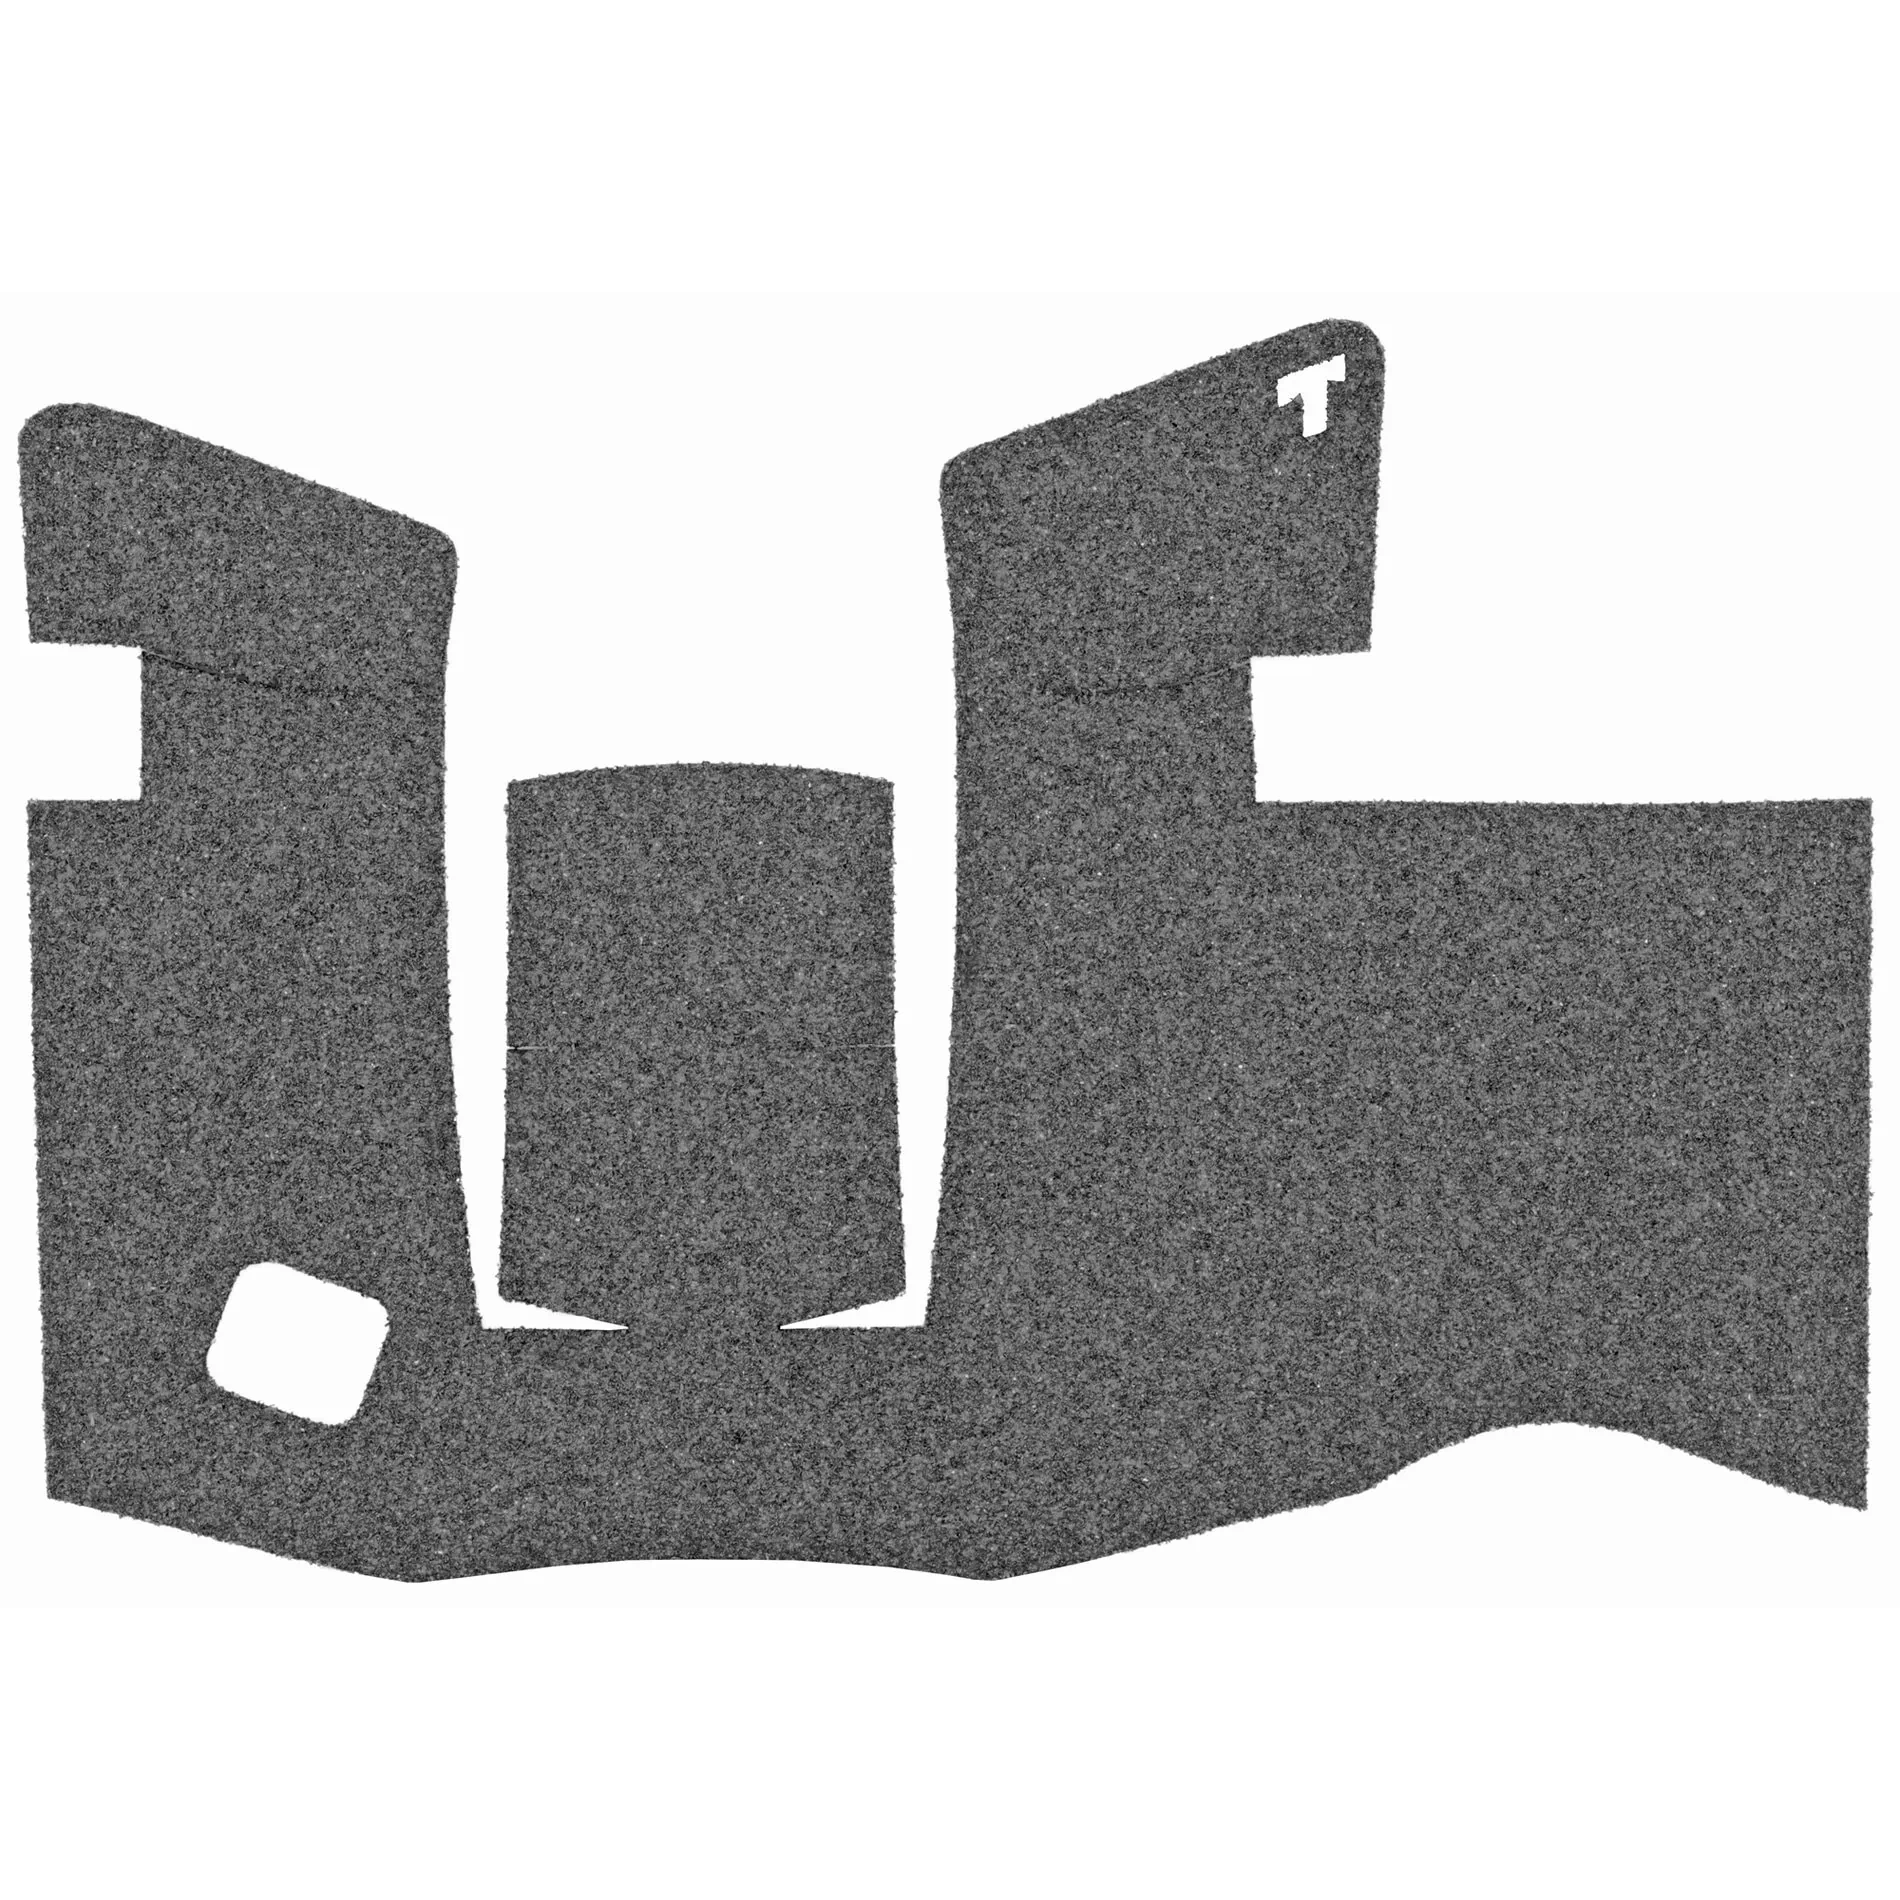 Talon Grips Rubber and Granulate Texture Adhesive Grip for Glock 43X/48